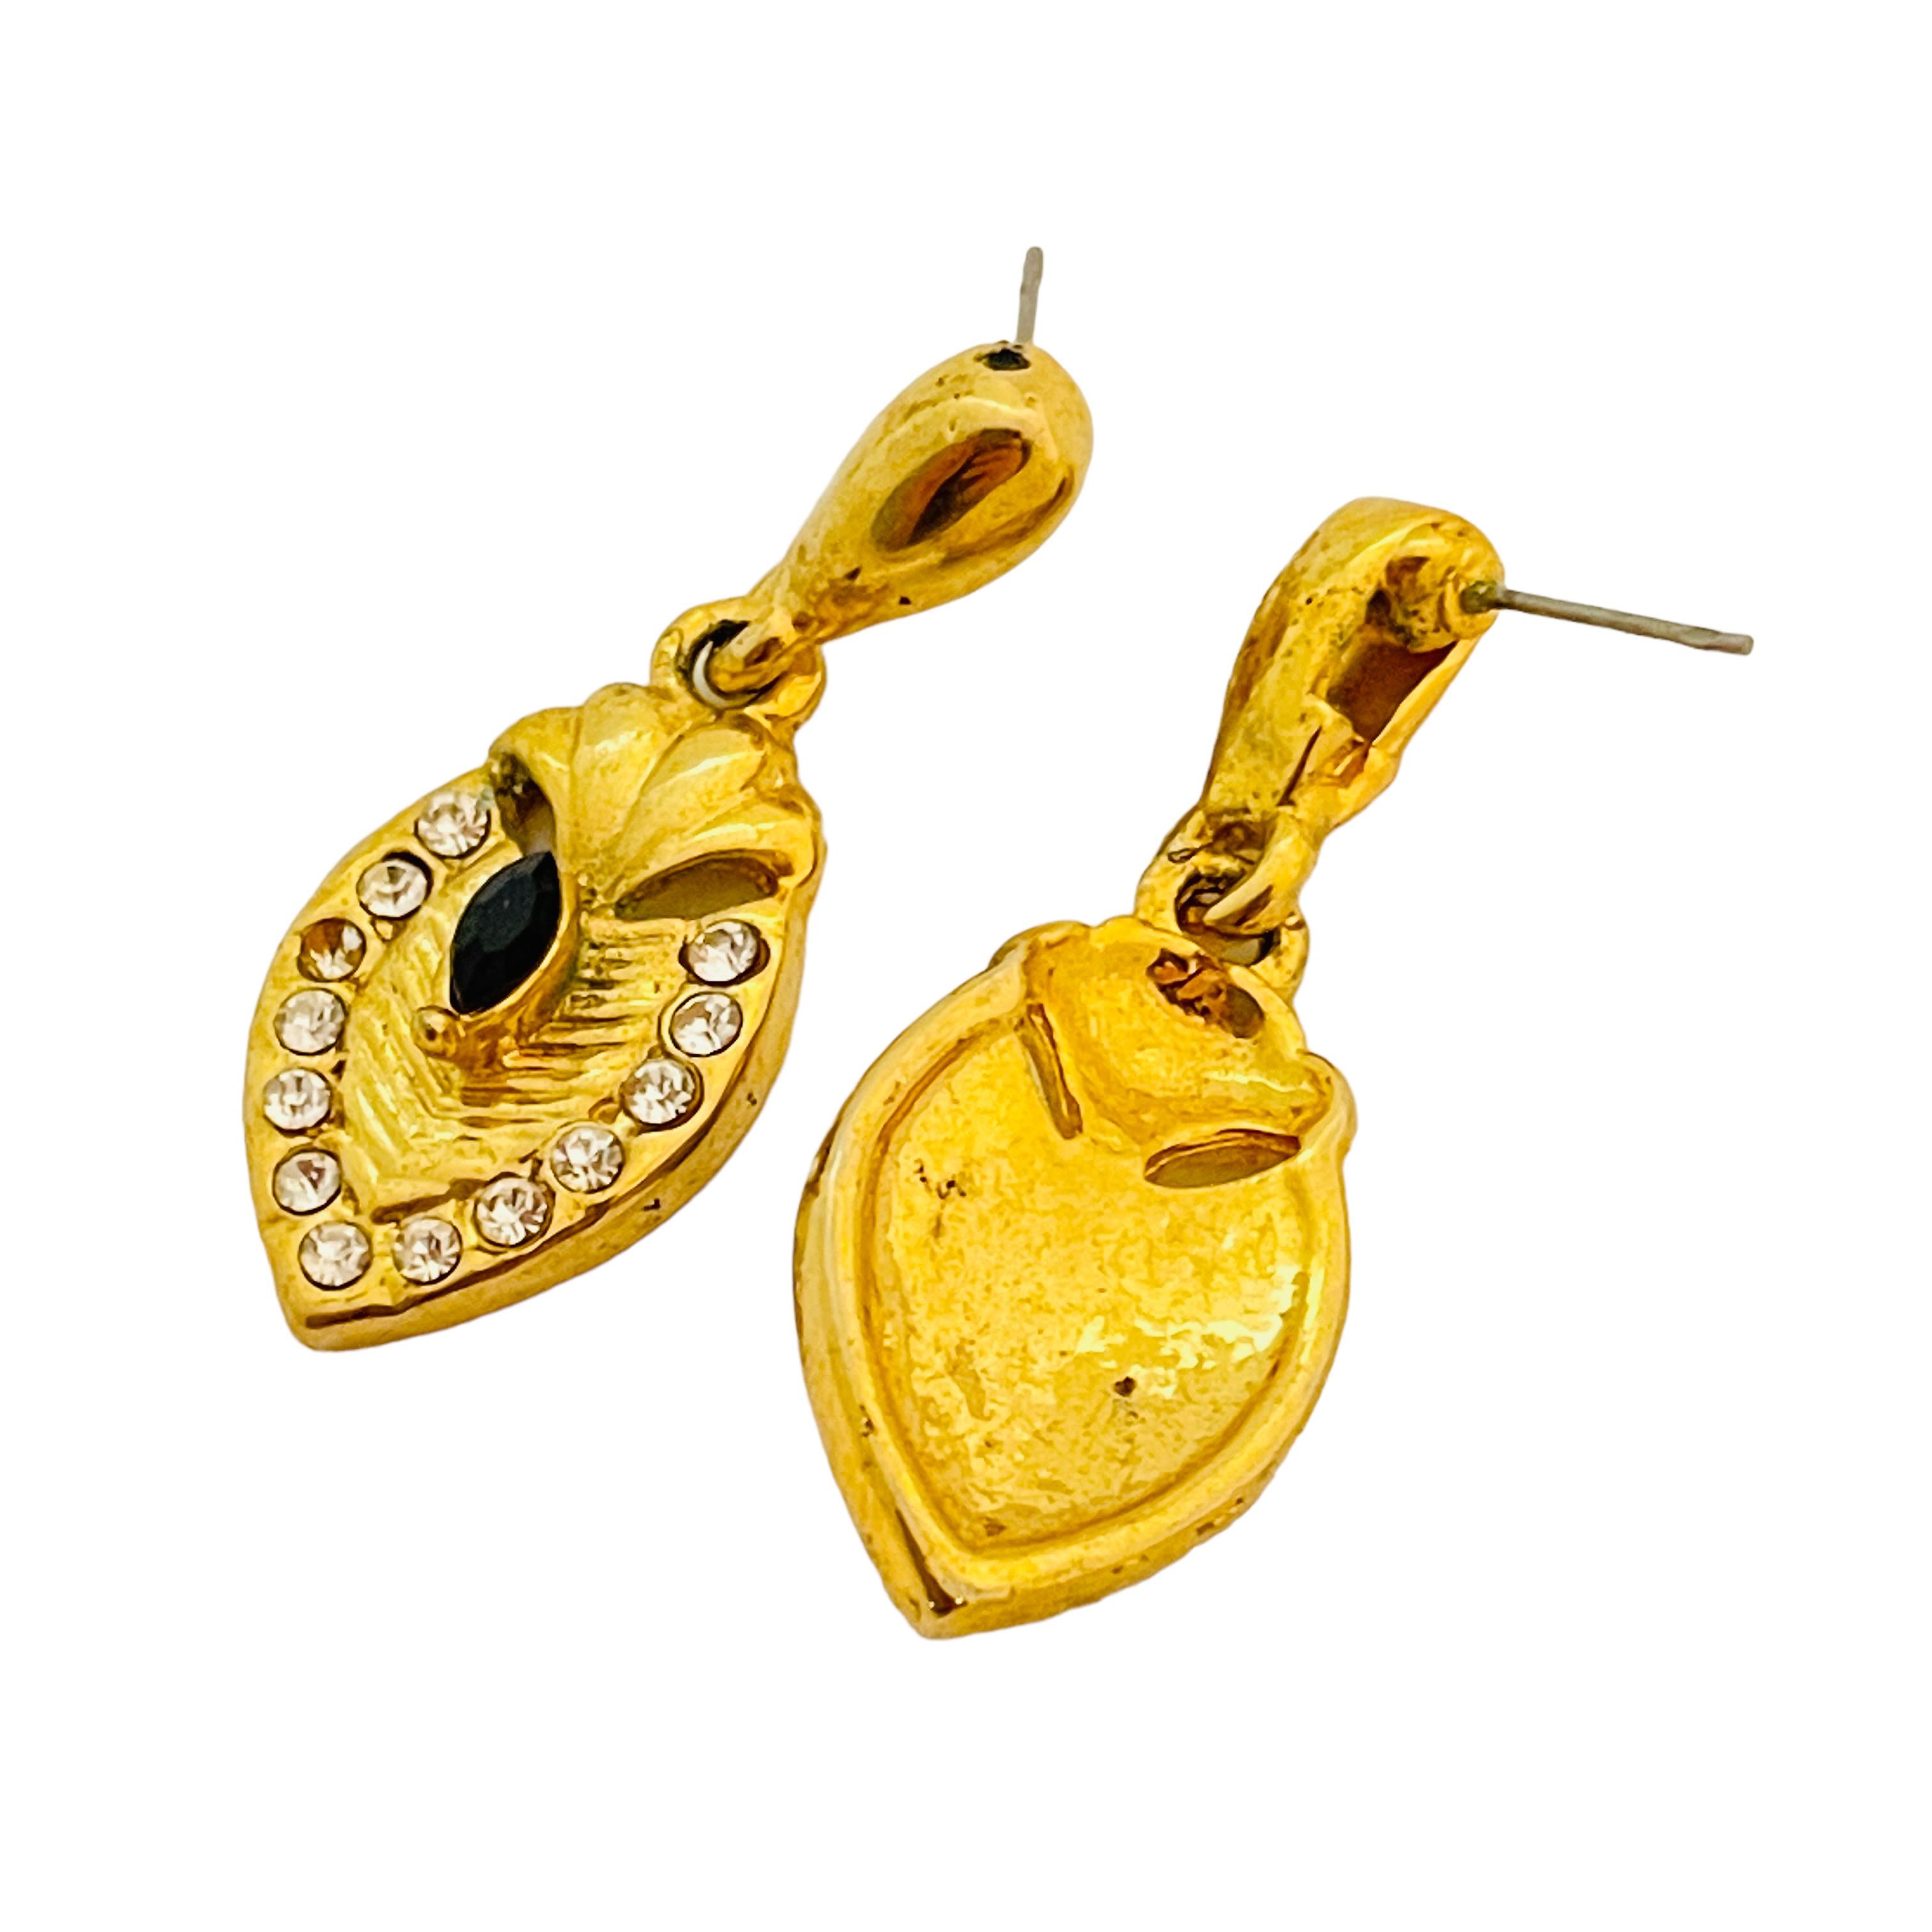 Vintage gold rhinestones dangle designer runway pierced earrings In Good Condition For Sale In Palos Hills, IL